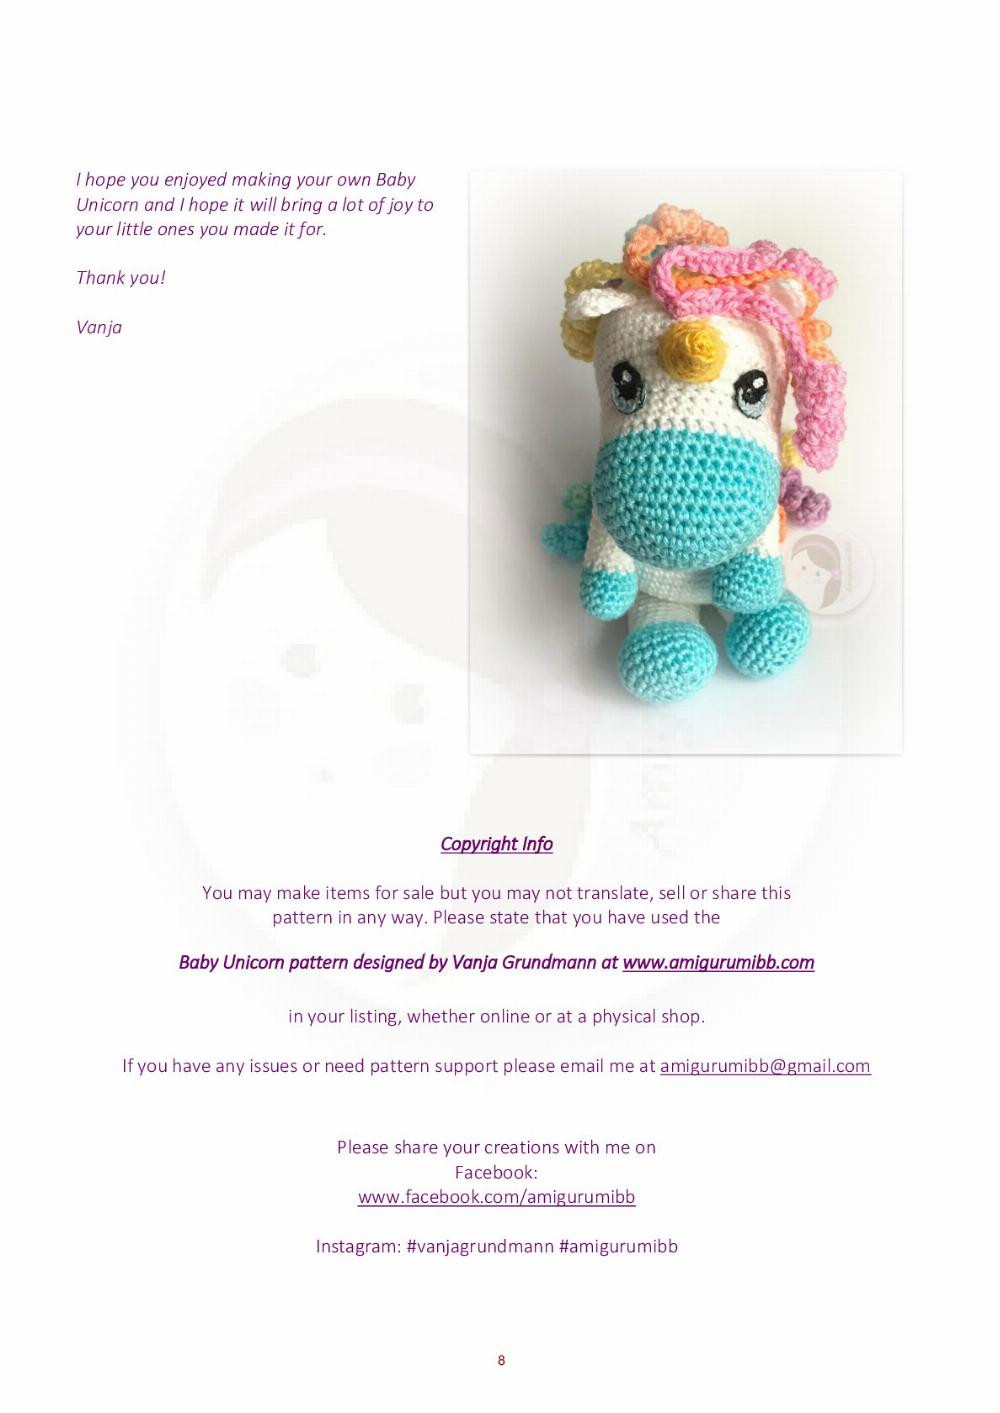 Baby Unicorn for our little ones with love